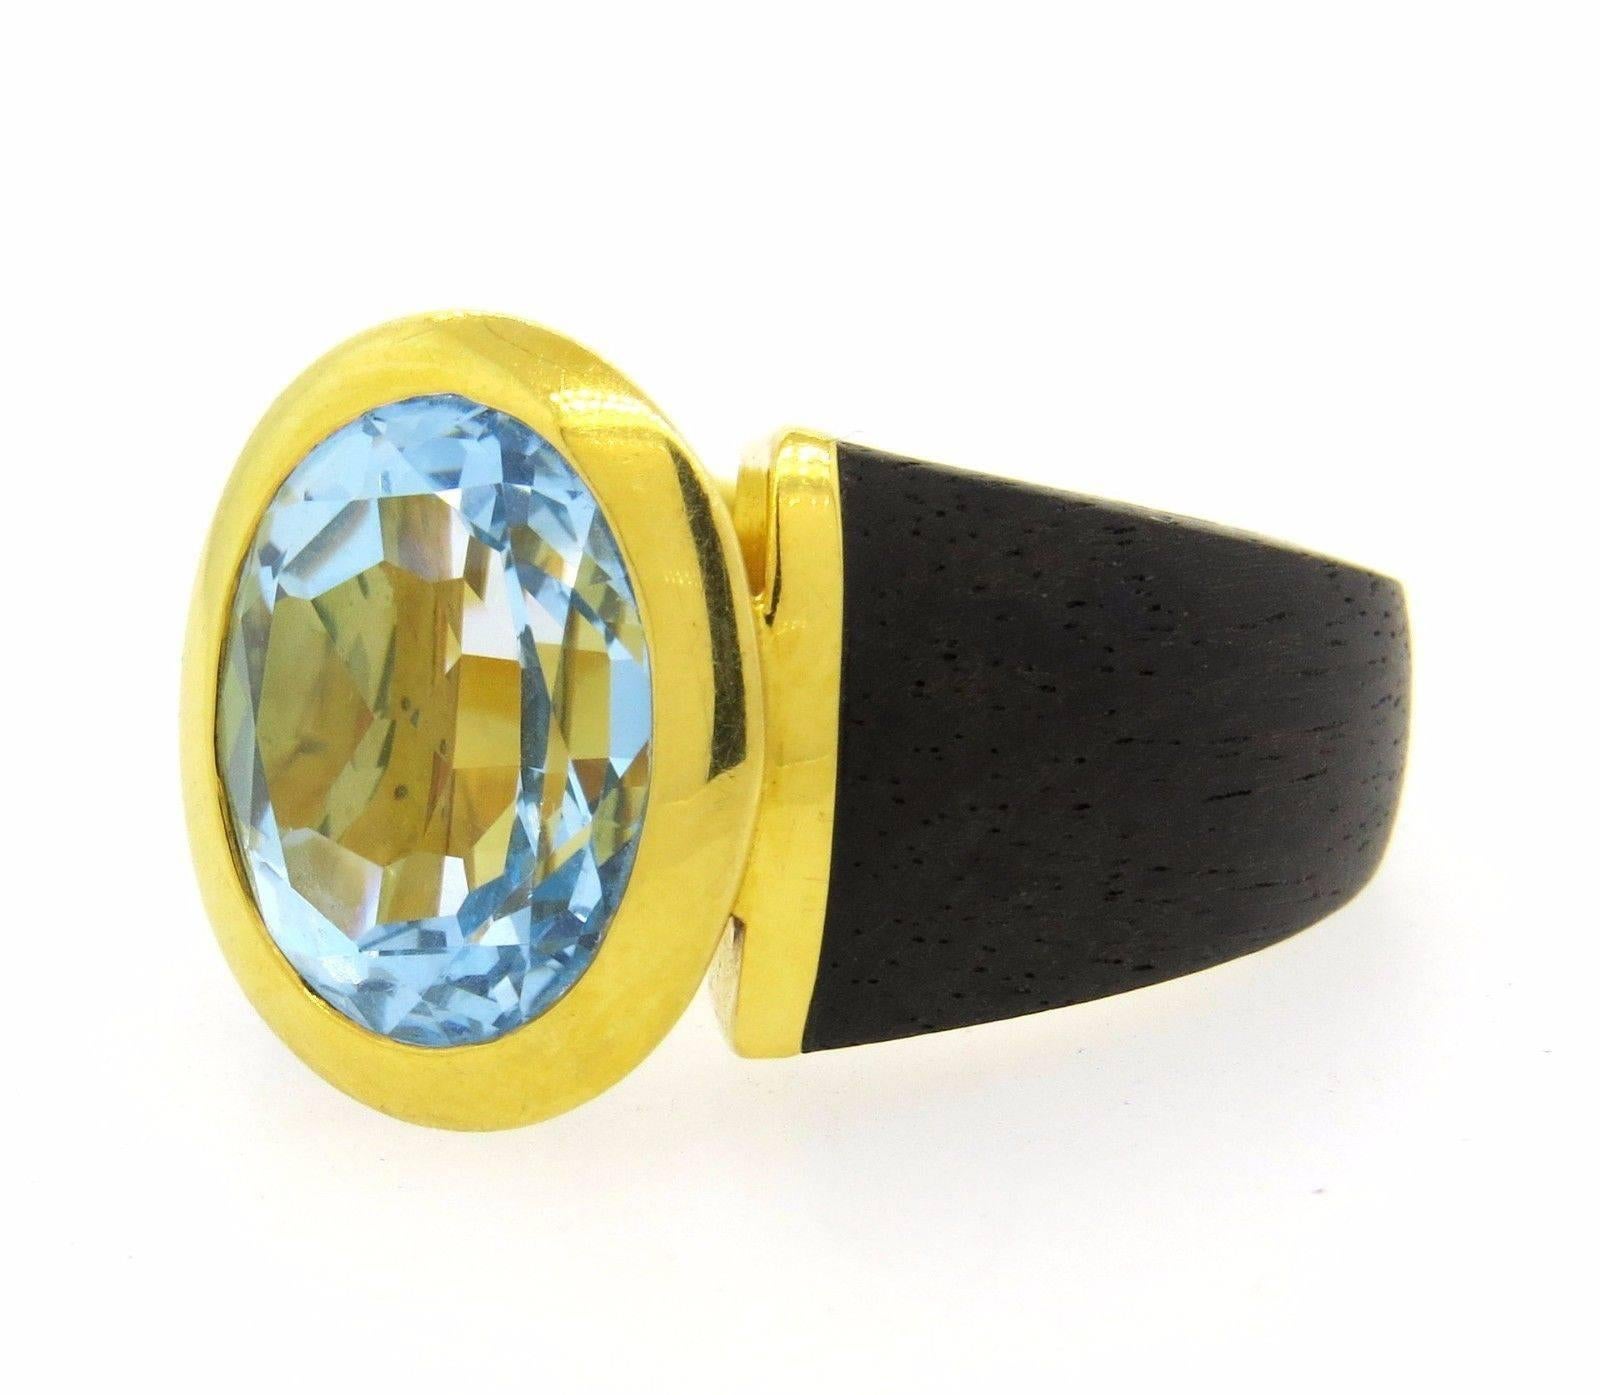 An 18K yellow gold and wood ring set with a blue topaz.  Crafted by Lotus Arts de Vivre, the ring is a size 6 and 17.8mm at the widest point.  The weight of the ring is 15.4 grams. Marked: Makers Mark, 18K.